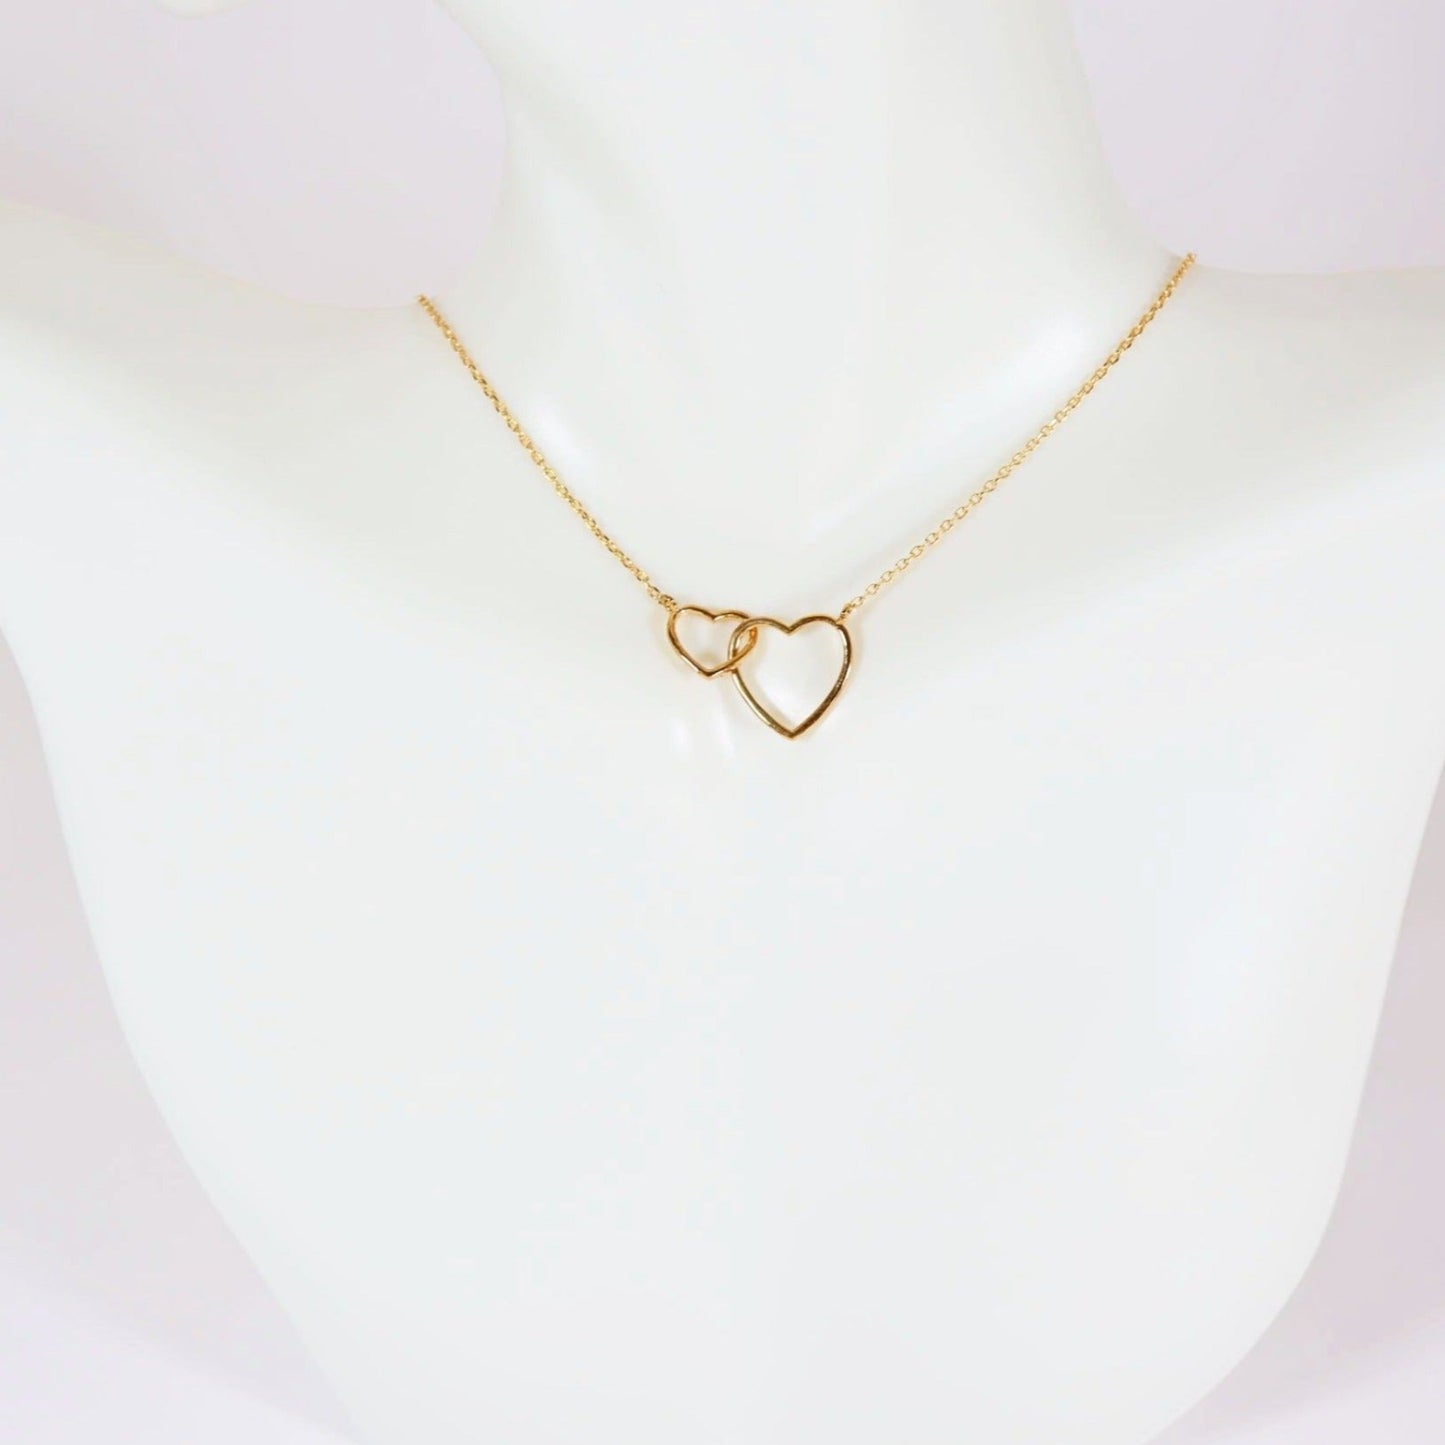 Heart Cutout Link Charm Necklace - Simply Clutched